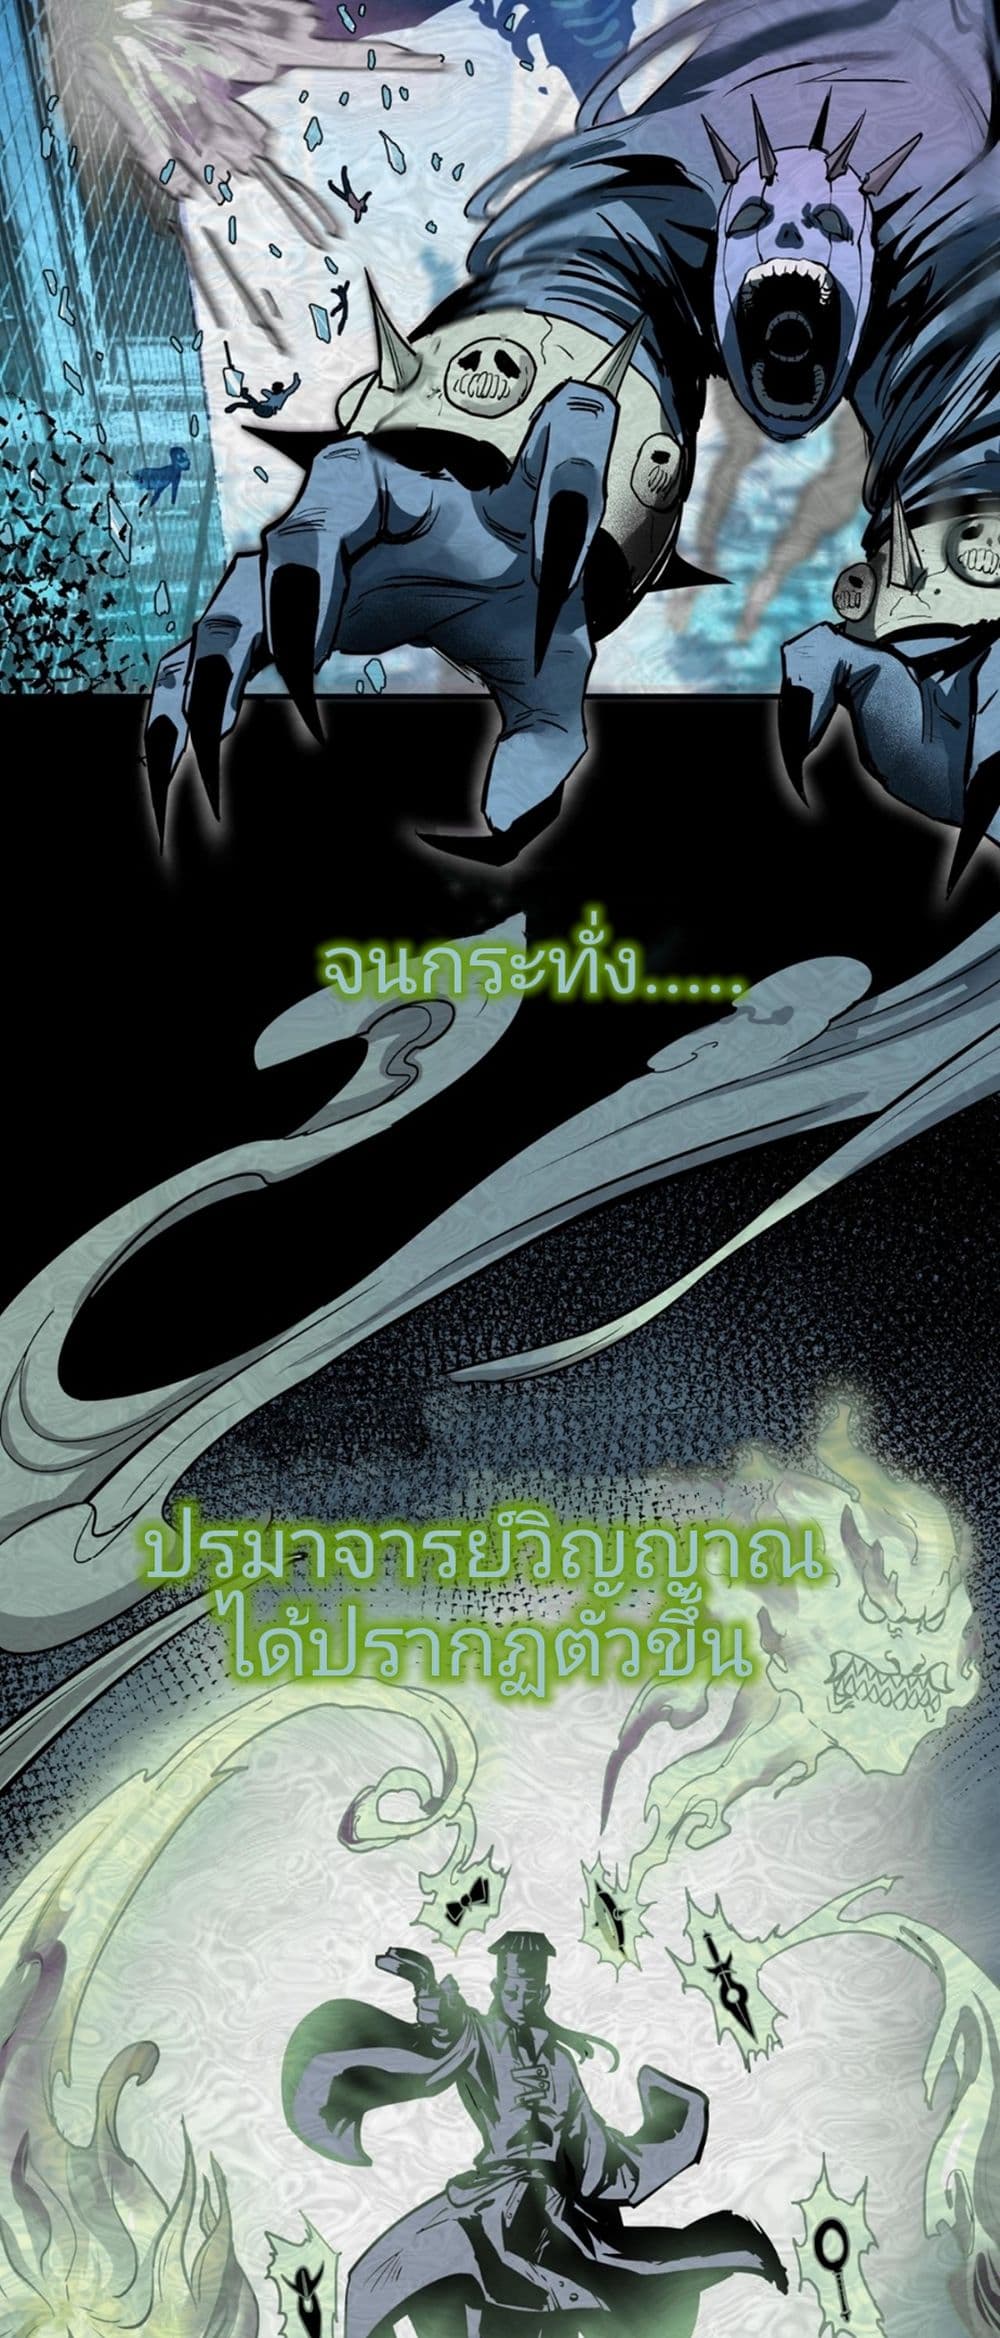 The Age of Ghost Spirits à¸à¸­à¸à¸à¸µà¹ 1 (4)